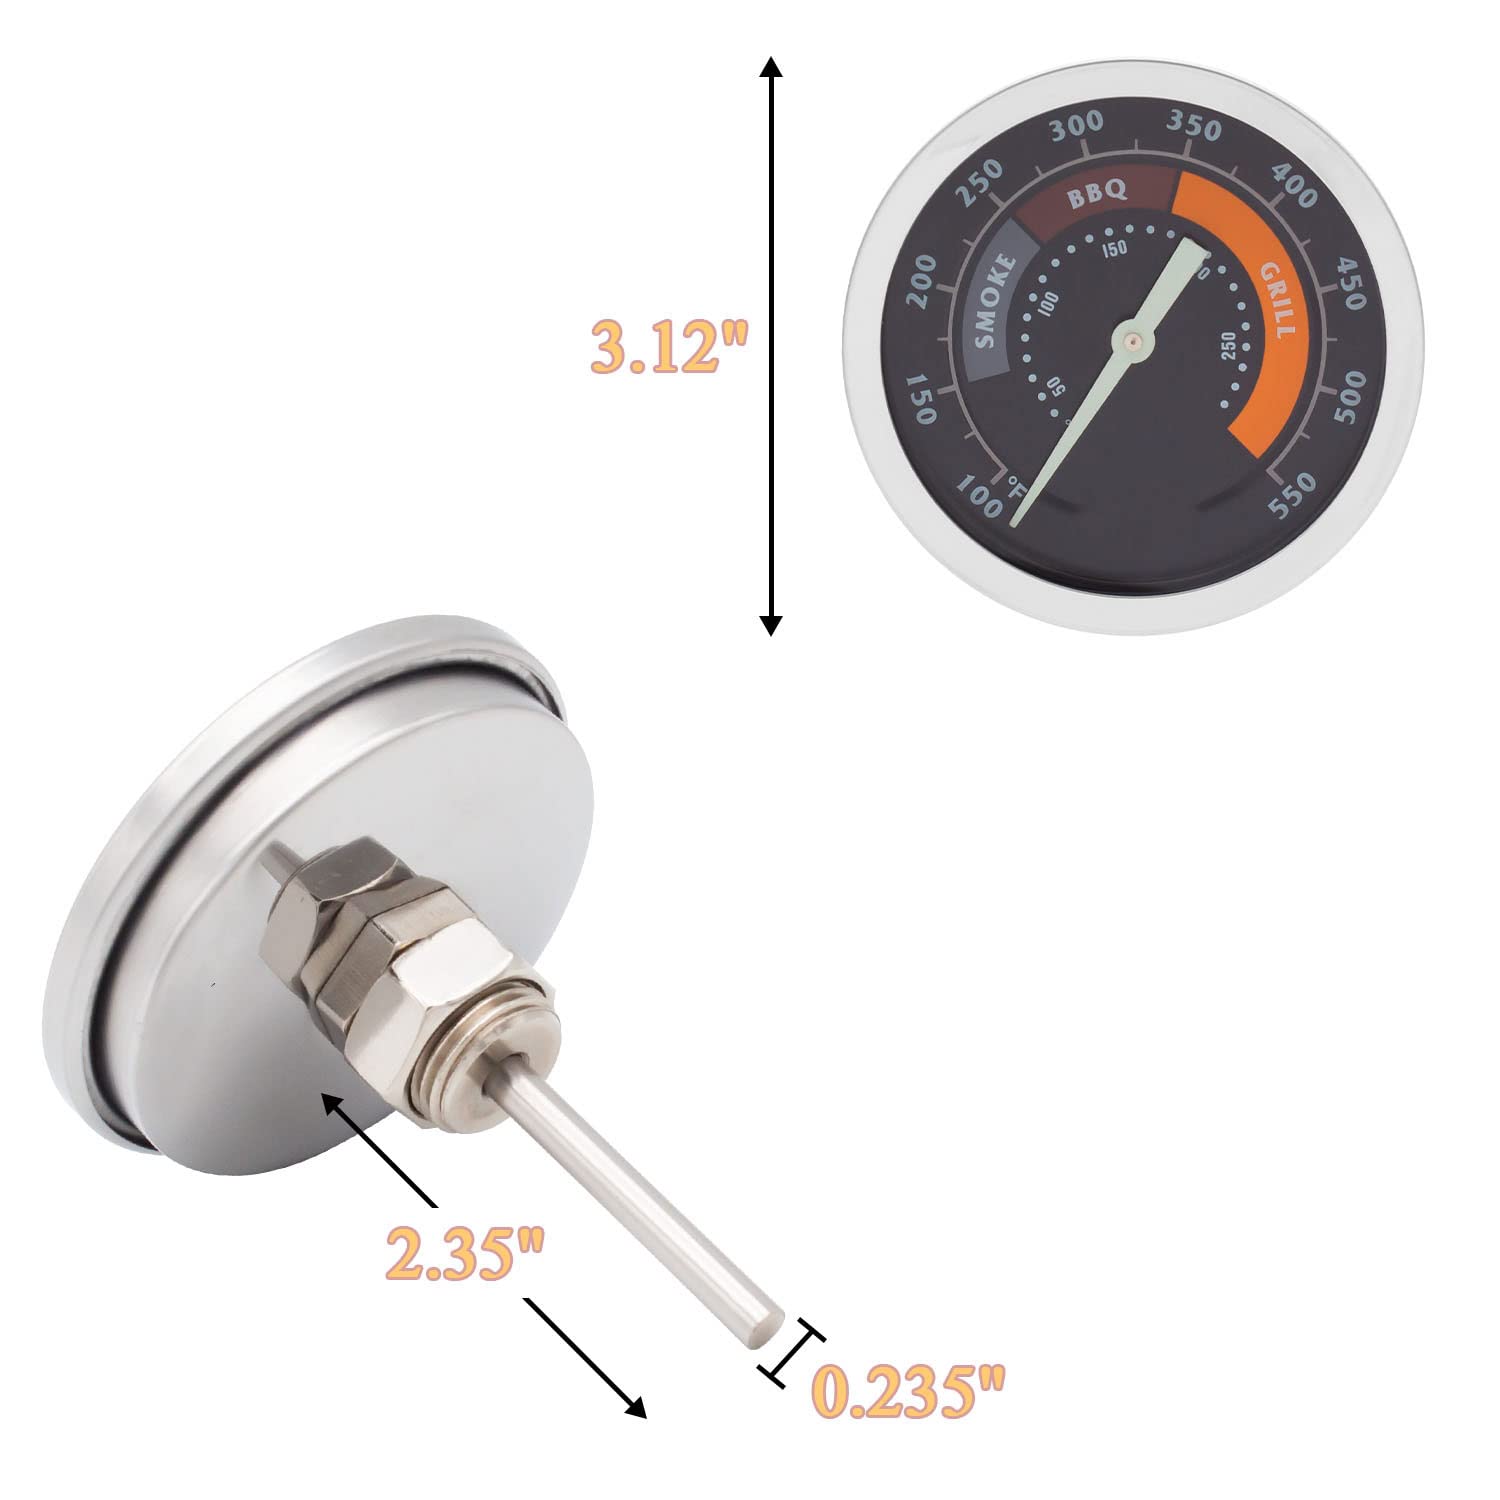 Barbecue BBQ Smoker Grill Thermometer Temperature Gauge